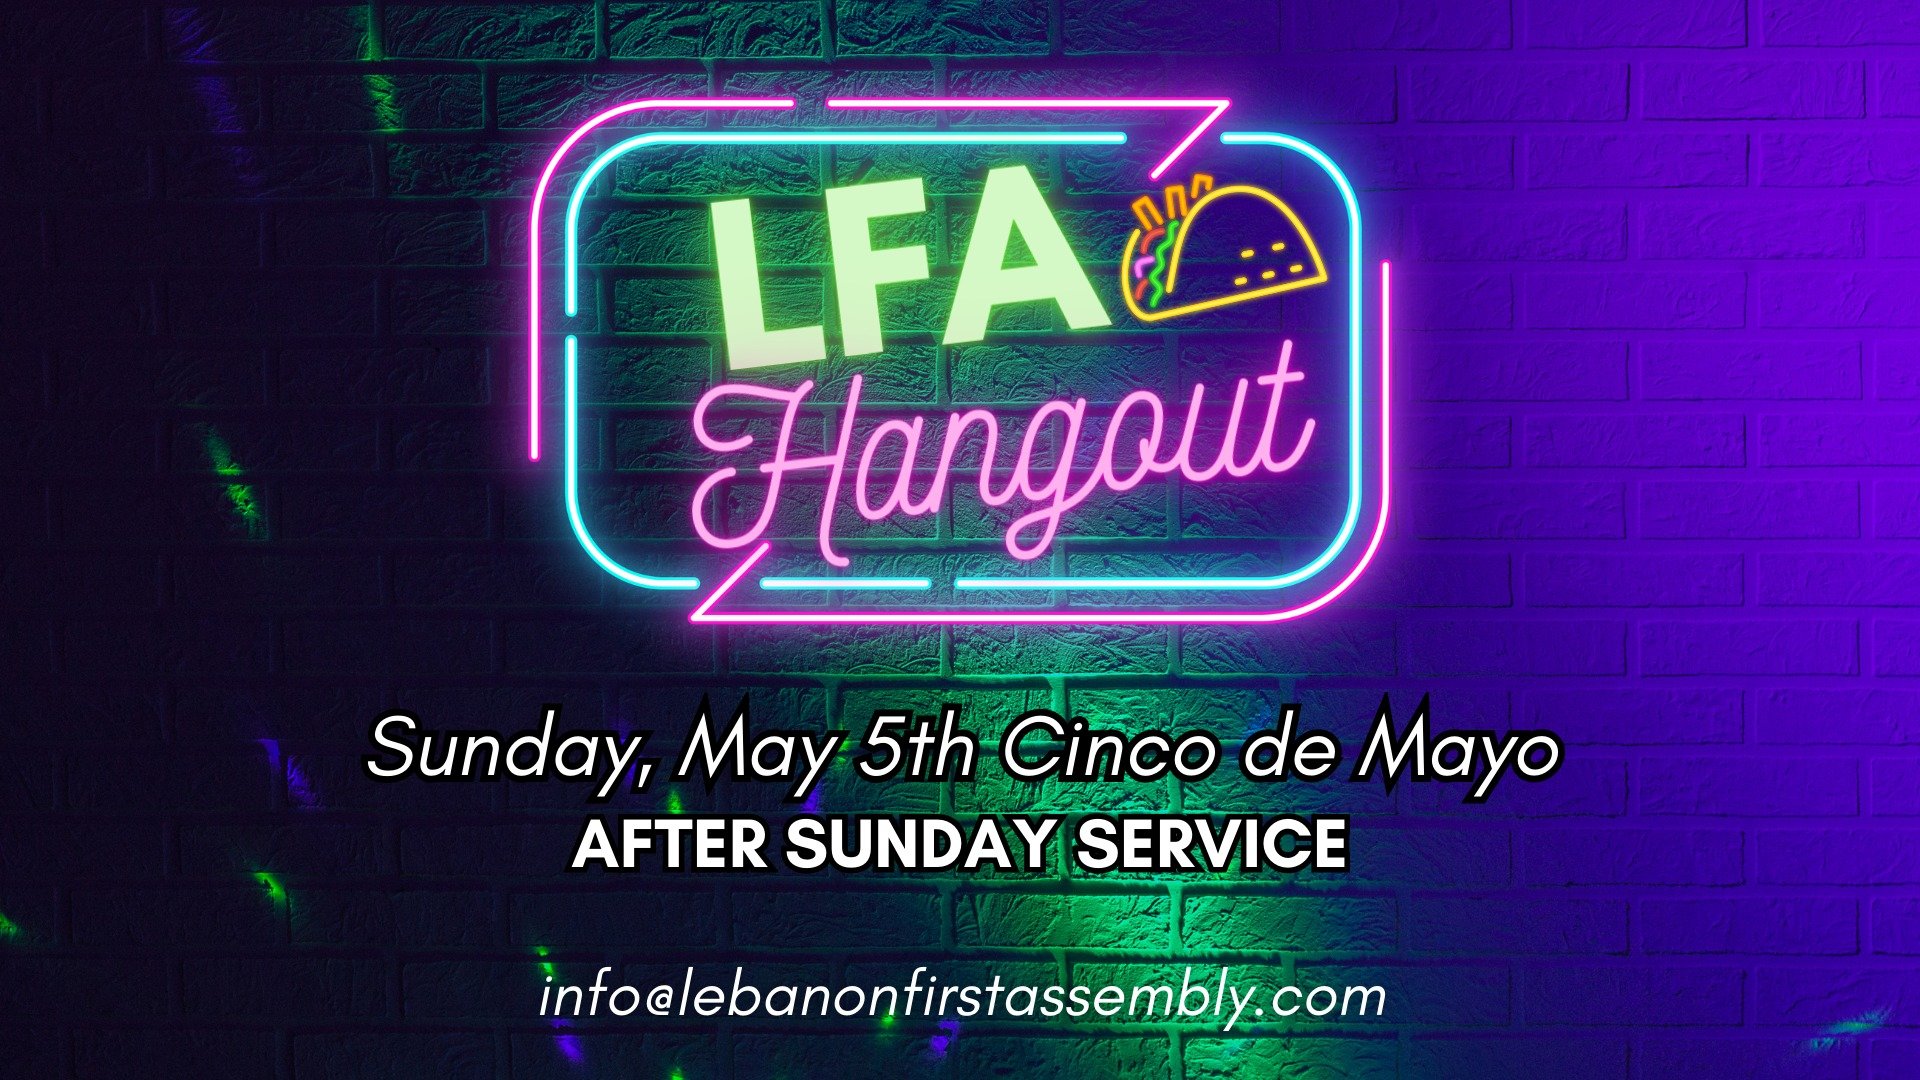 🌮This Sunday come join us for tacos and activities at our Cinco De Mayo LFA Hangout directly after Sunday Service. See you there!

#lebfirst #lfahangout #families #tacos #community #lebanonoregon #pnwchurch #cincodemayo